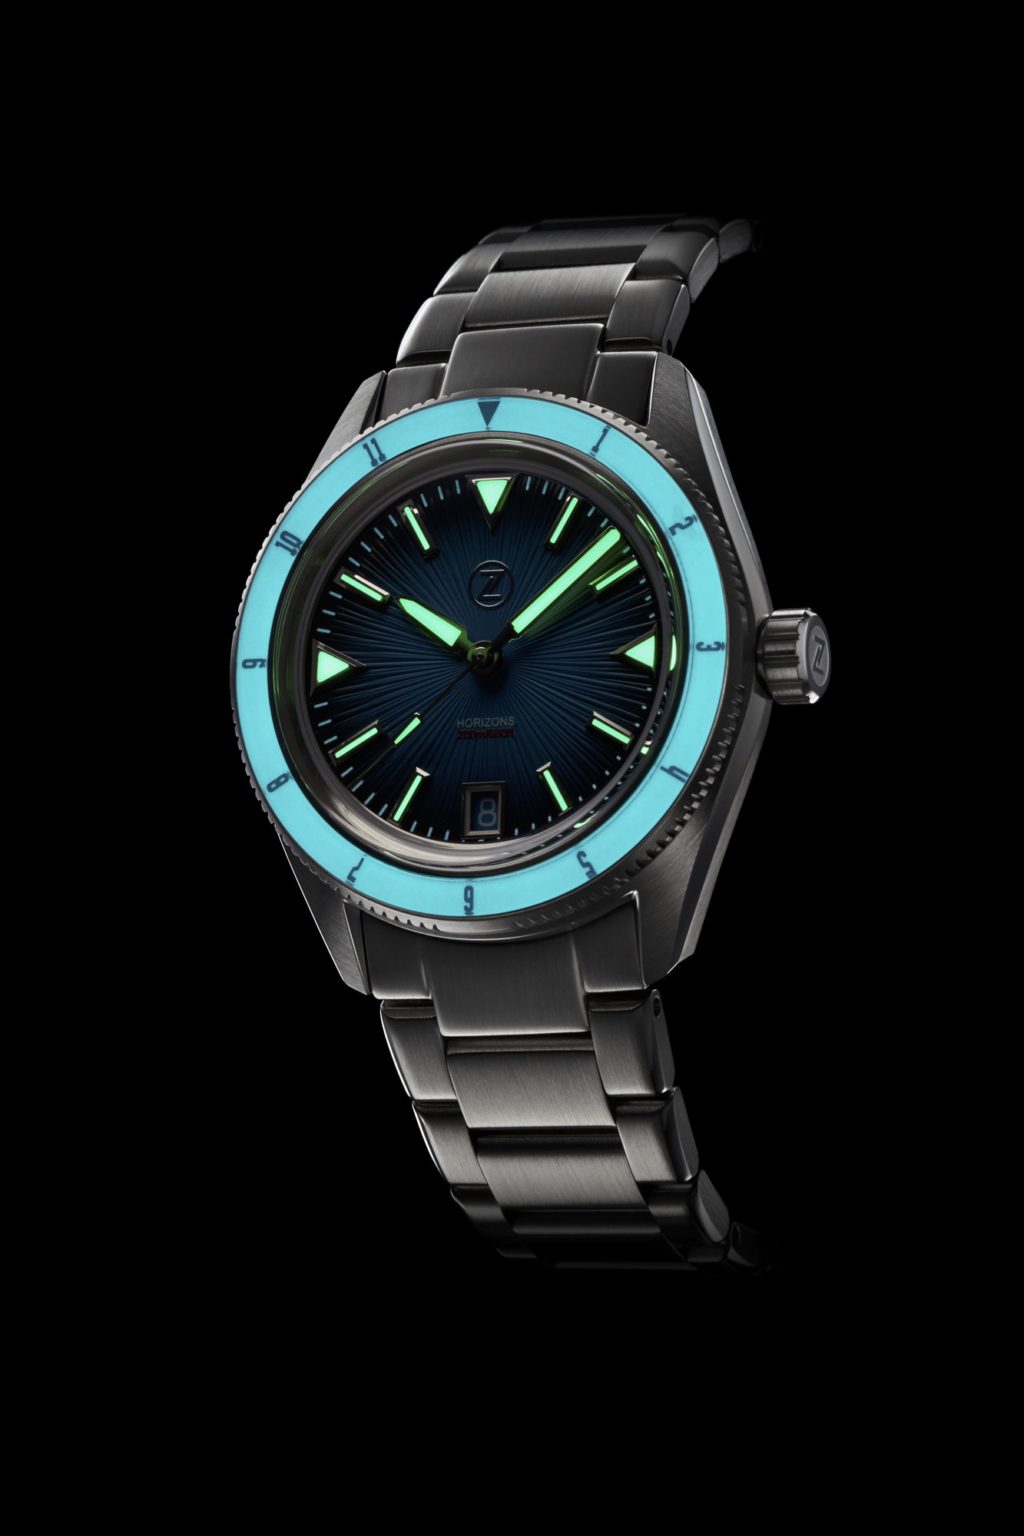 Zelos Introduces Three Striking New Models in the Horizons Watch ...